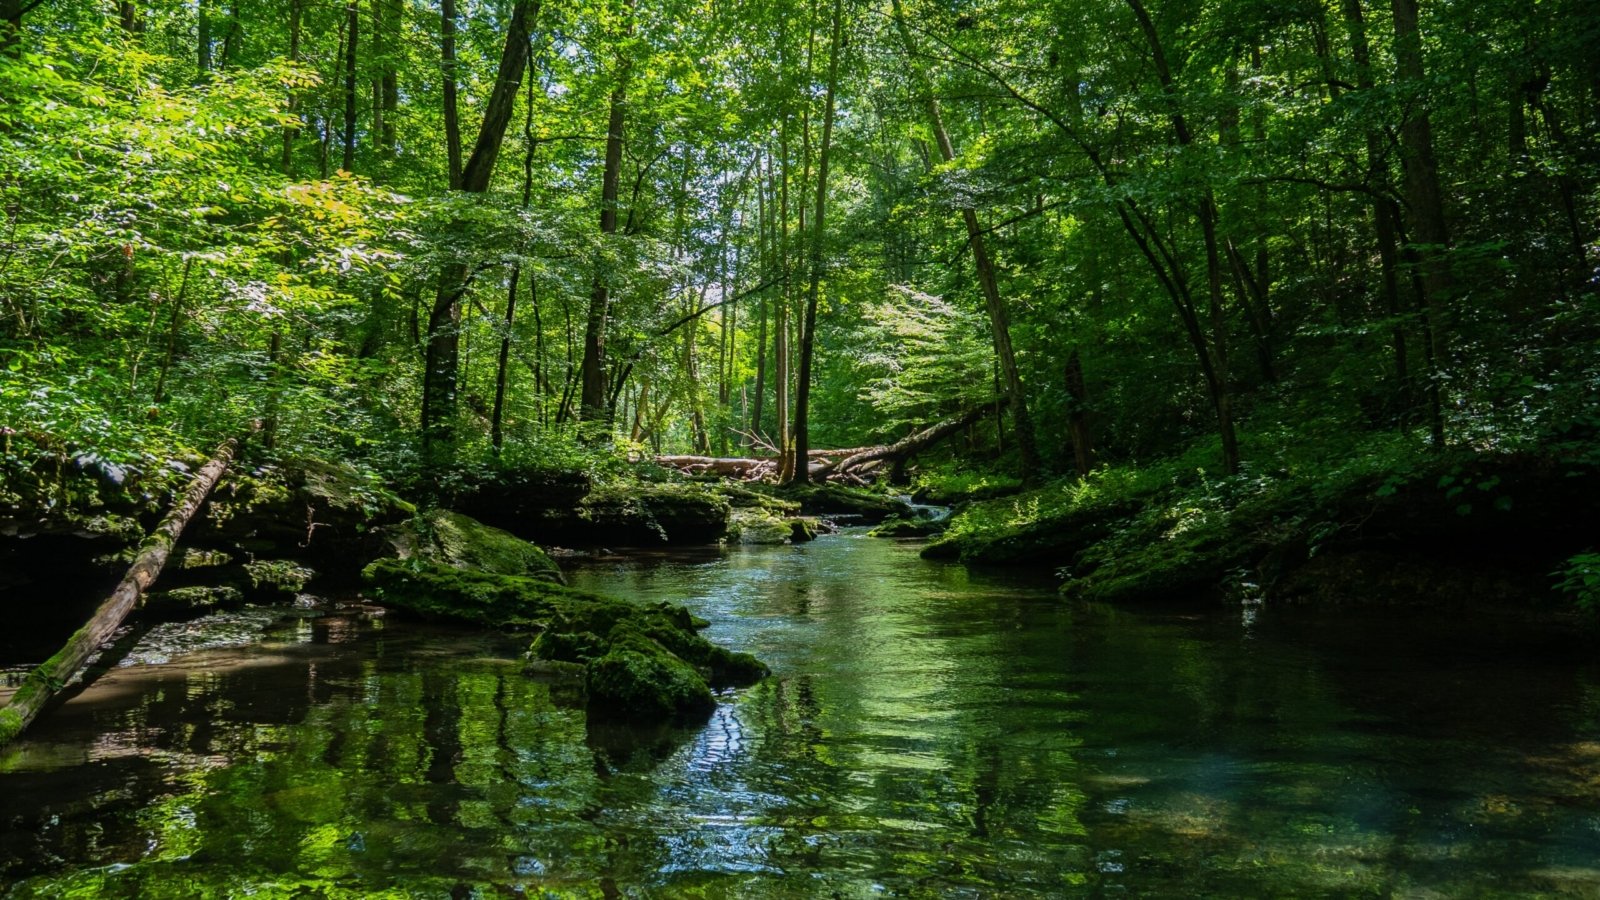 A beautiful scenery of a river surrounded by greenery in a forest